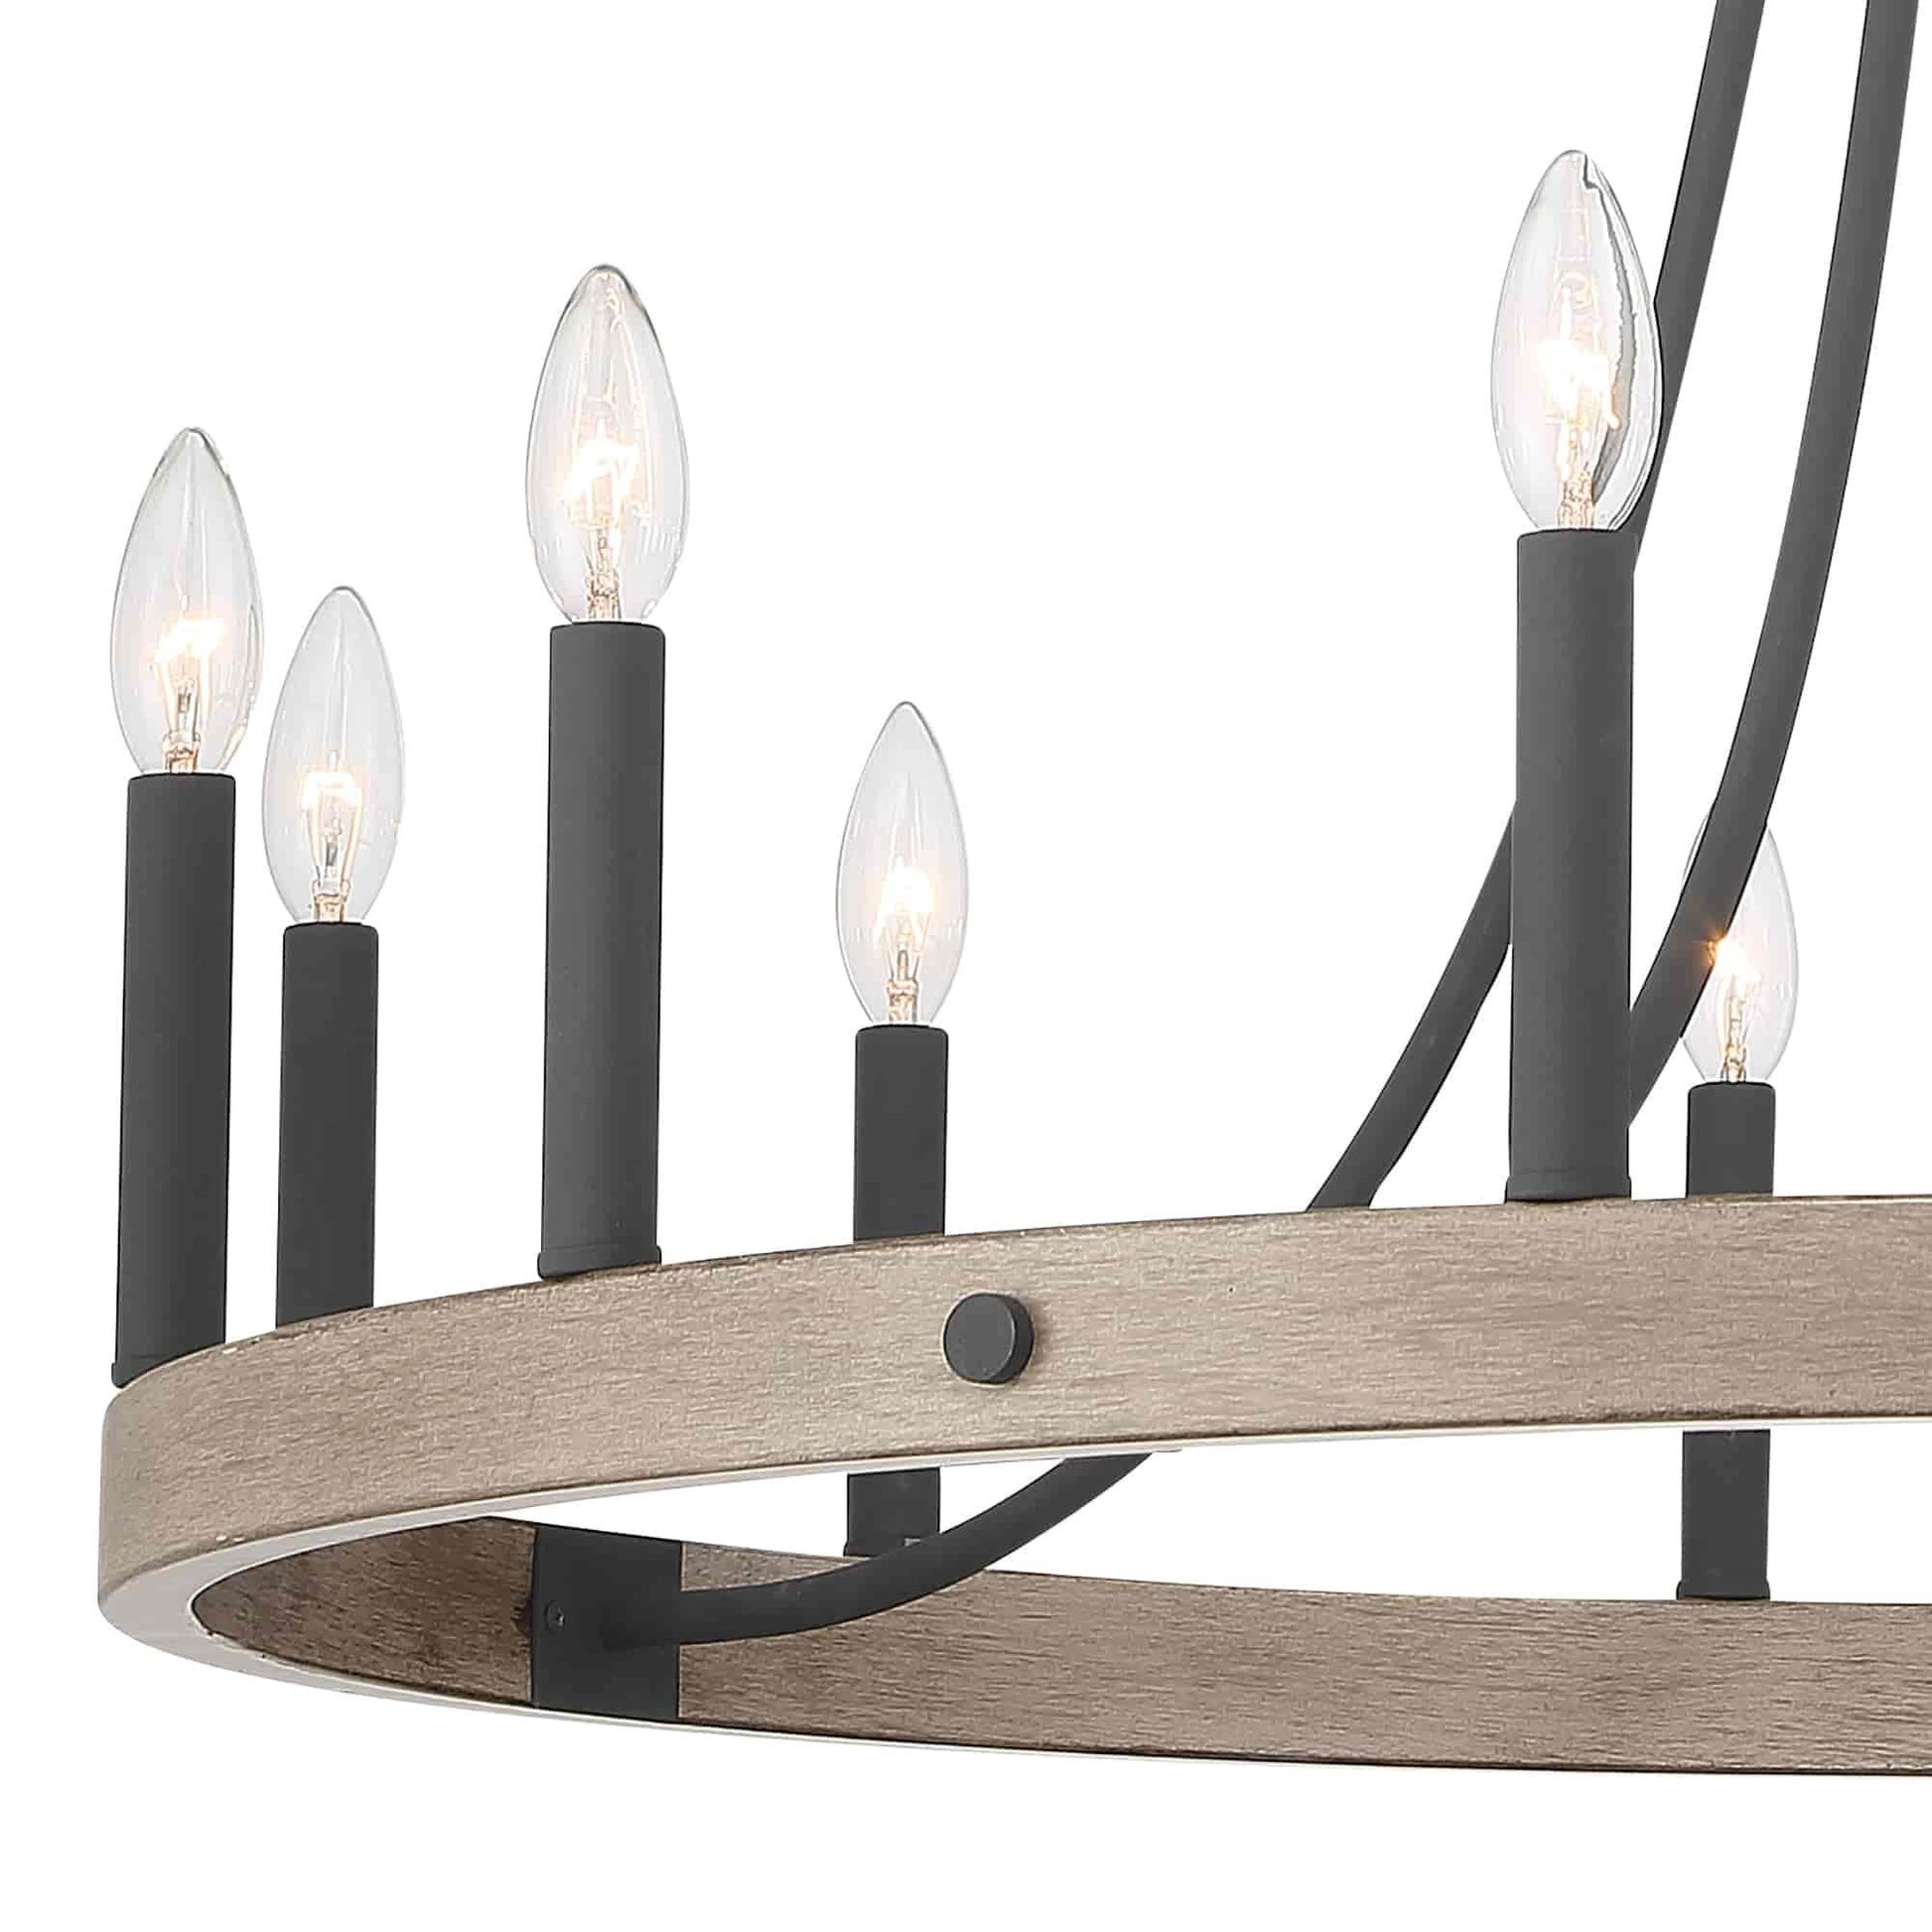 12 light candle style wagon wheel farmhouse chandelier (2) by ACROMA